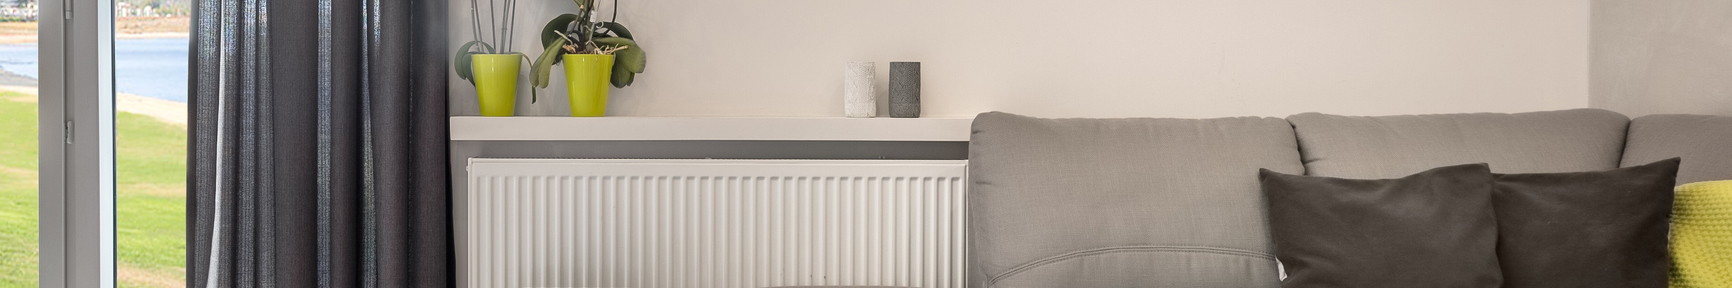 Central Heating Radiator in a living room